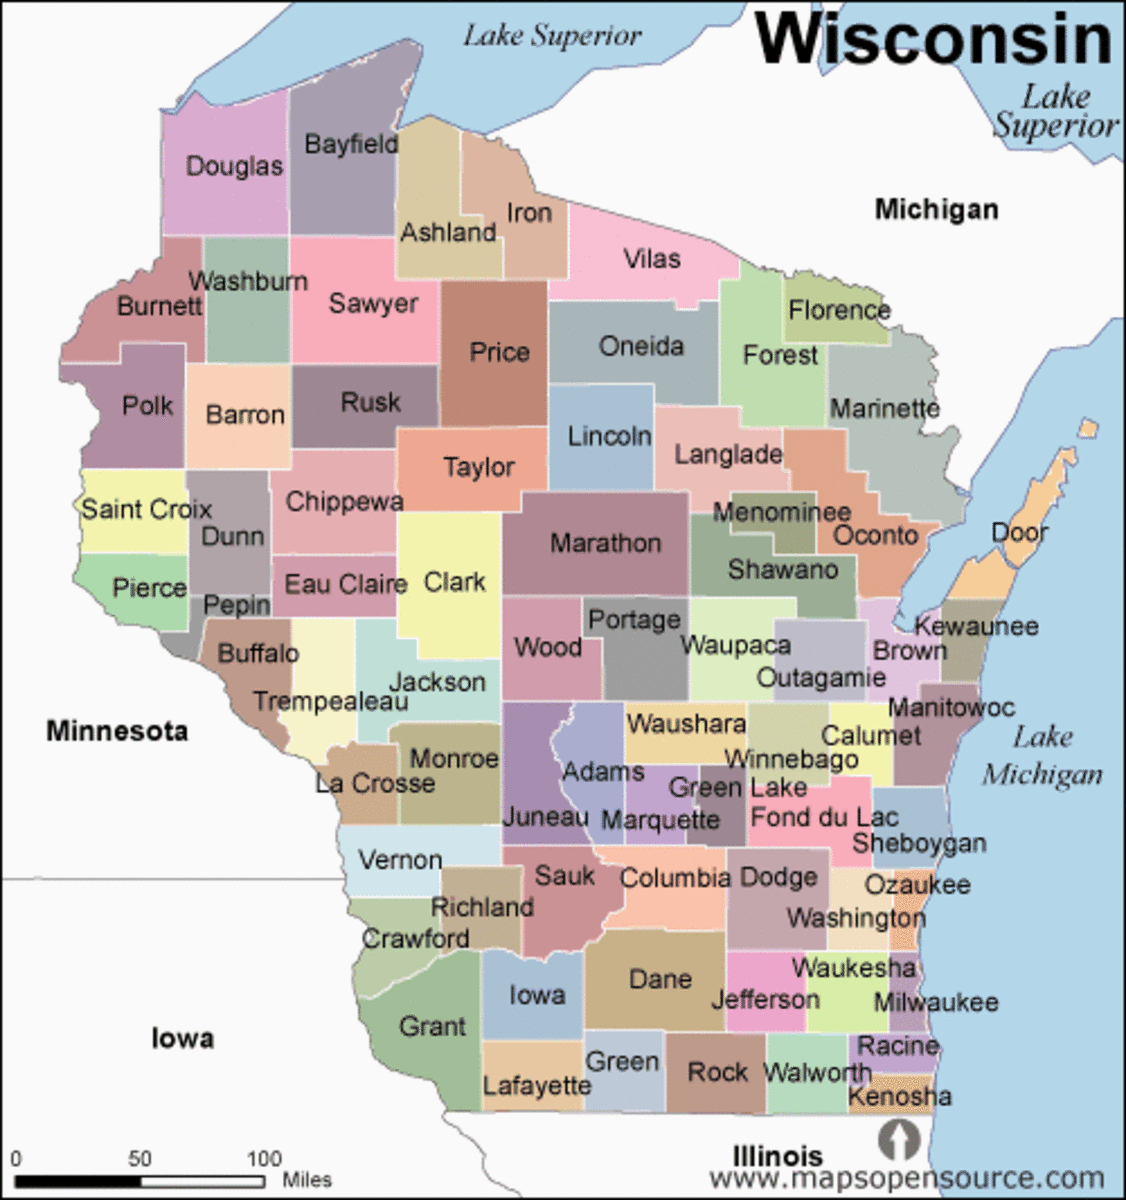 Wisconsin counties.  Wood county is in the central part of the state.